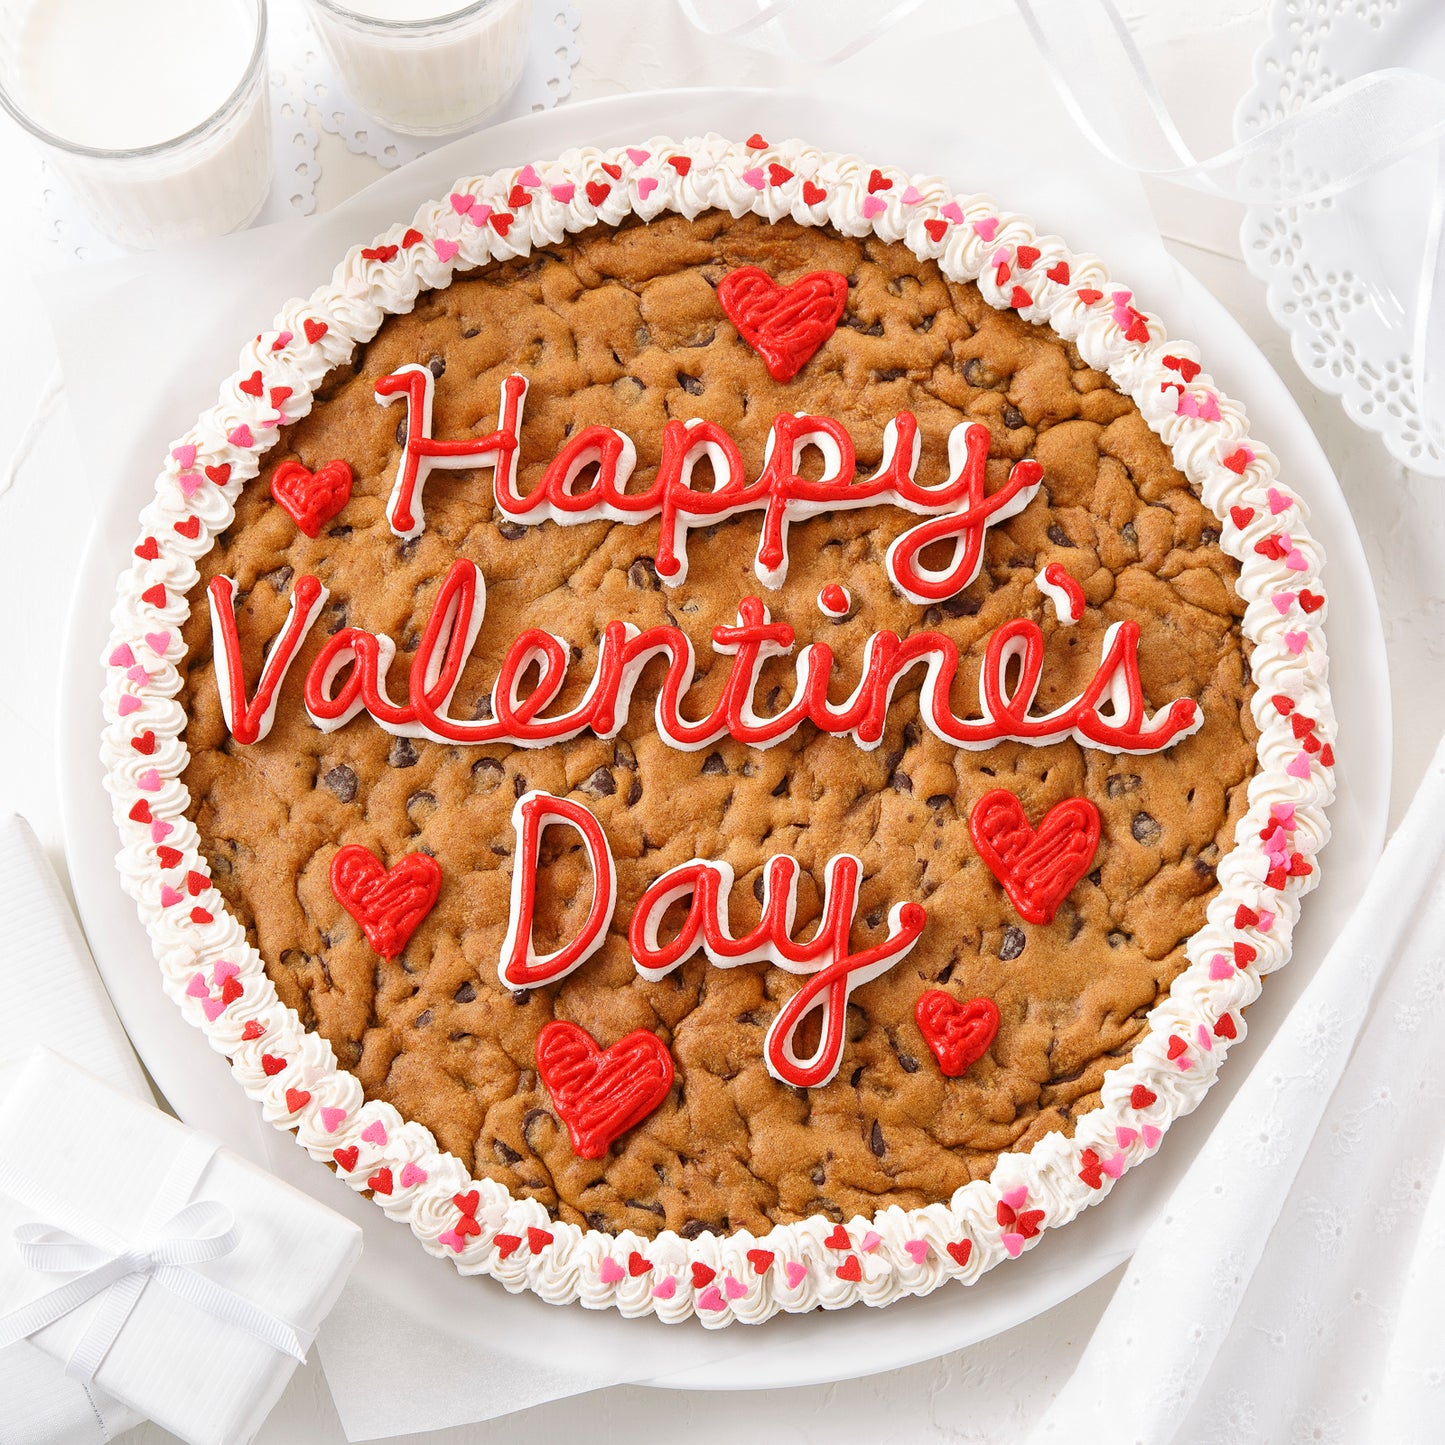 A Happy Valentine's Day cookie cake decorated with red and white frosting and heart-shaped sprinkles.